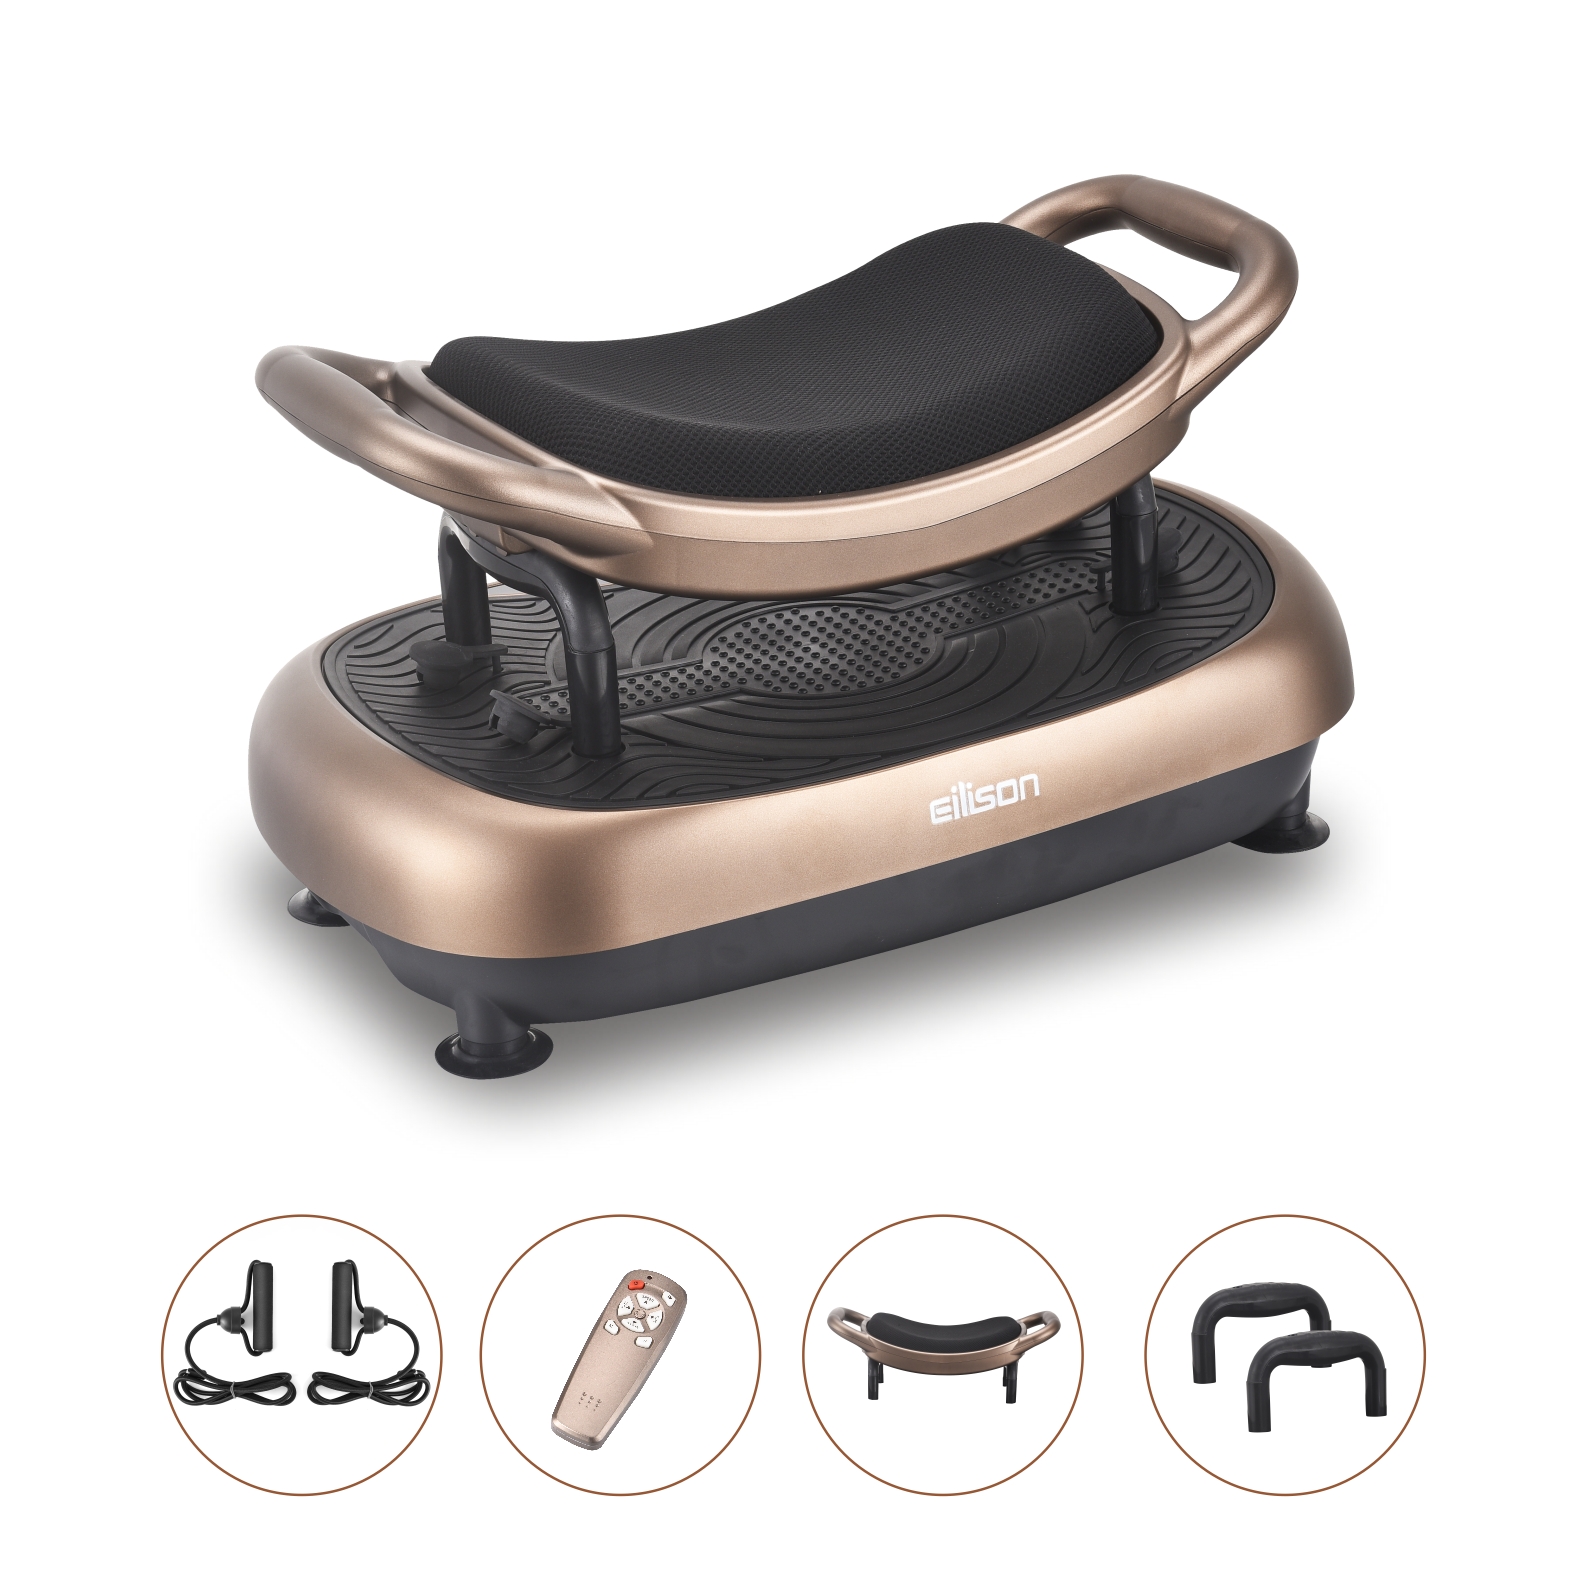 FITABS 3D Vibration Plate Exercise Machine - Brown